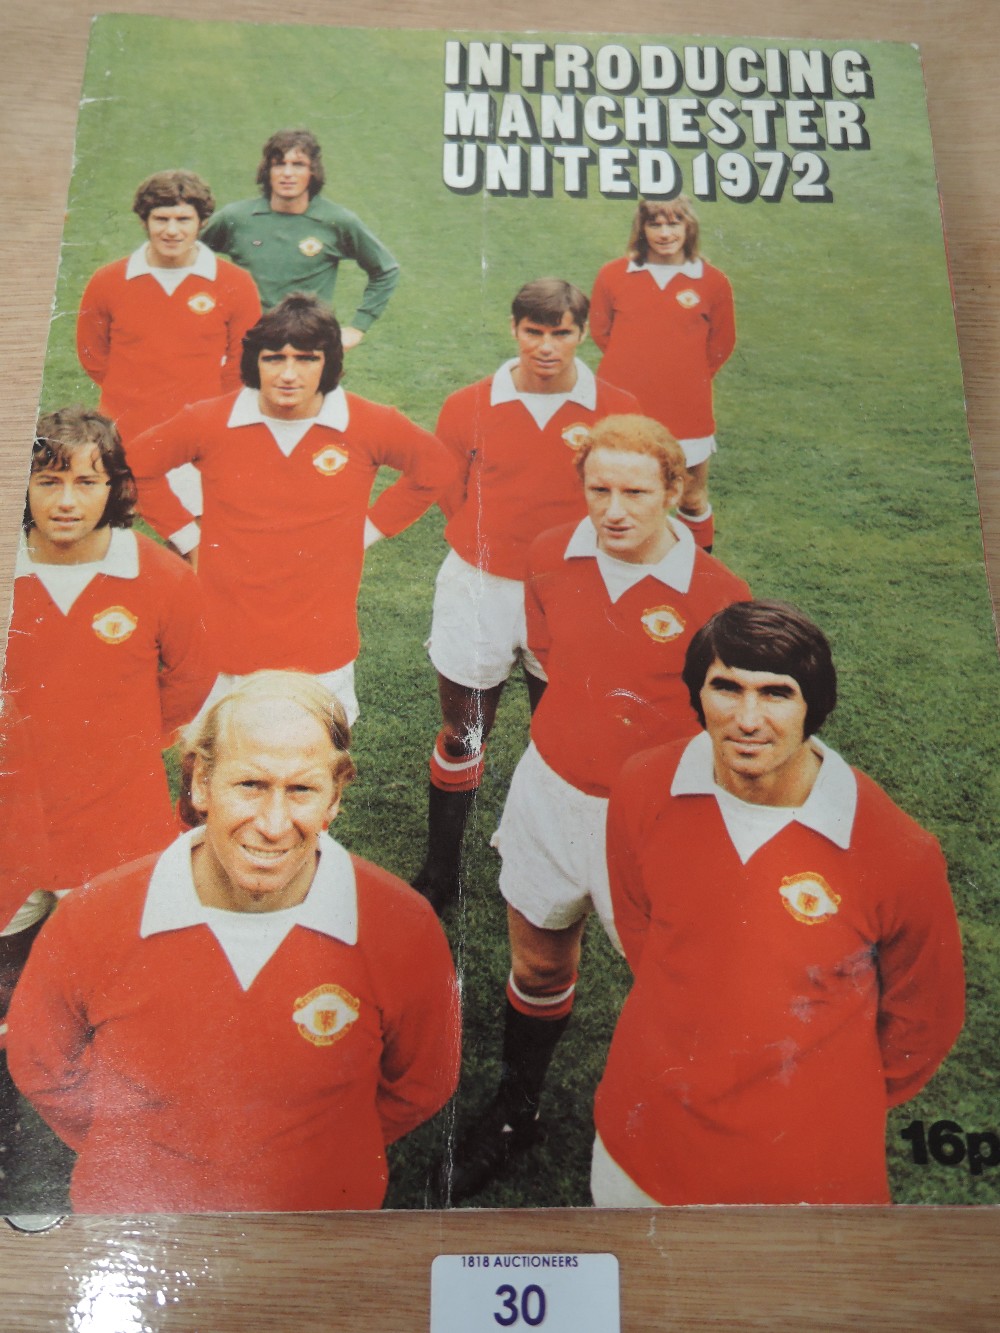 A leaflet 'introducing Manchester United 1972'